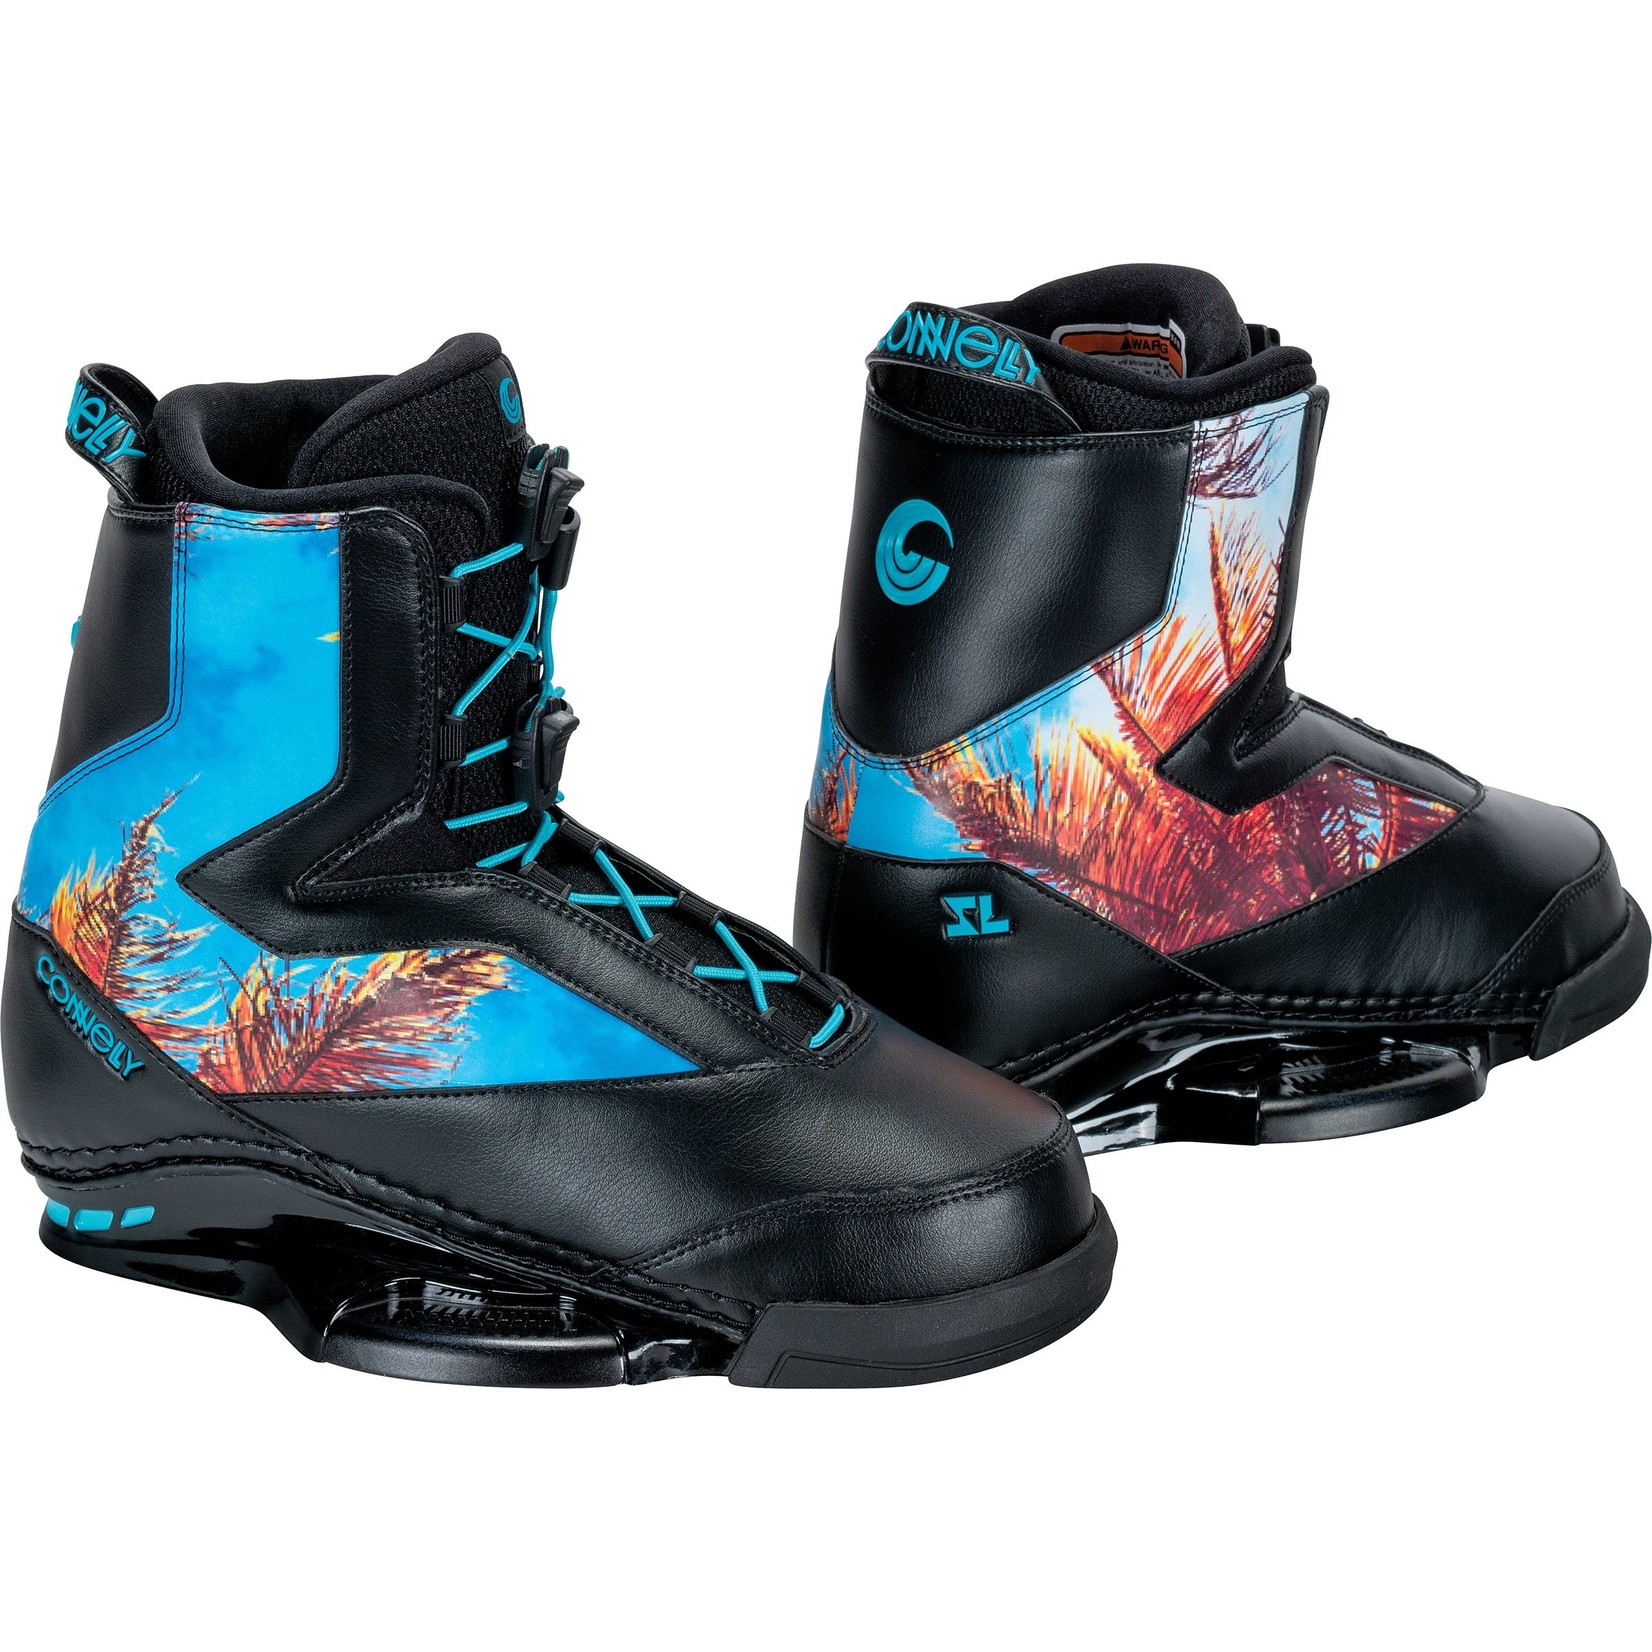 Connelly 2021 SL Wakeboard Boot M (9-10)